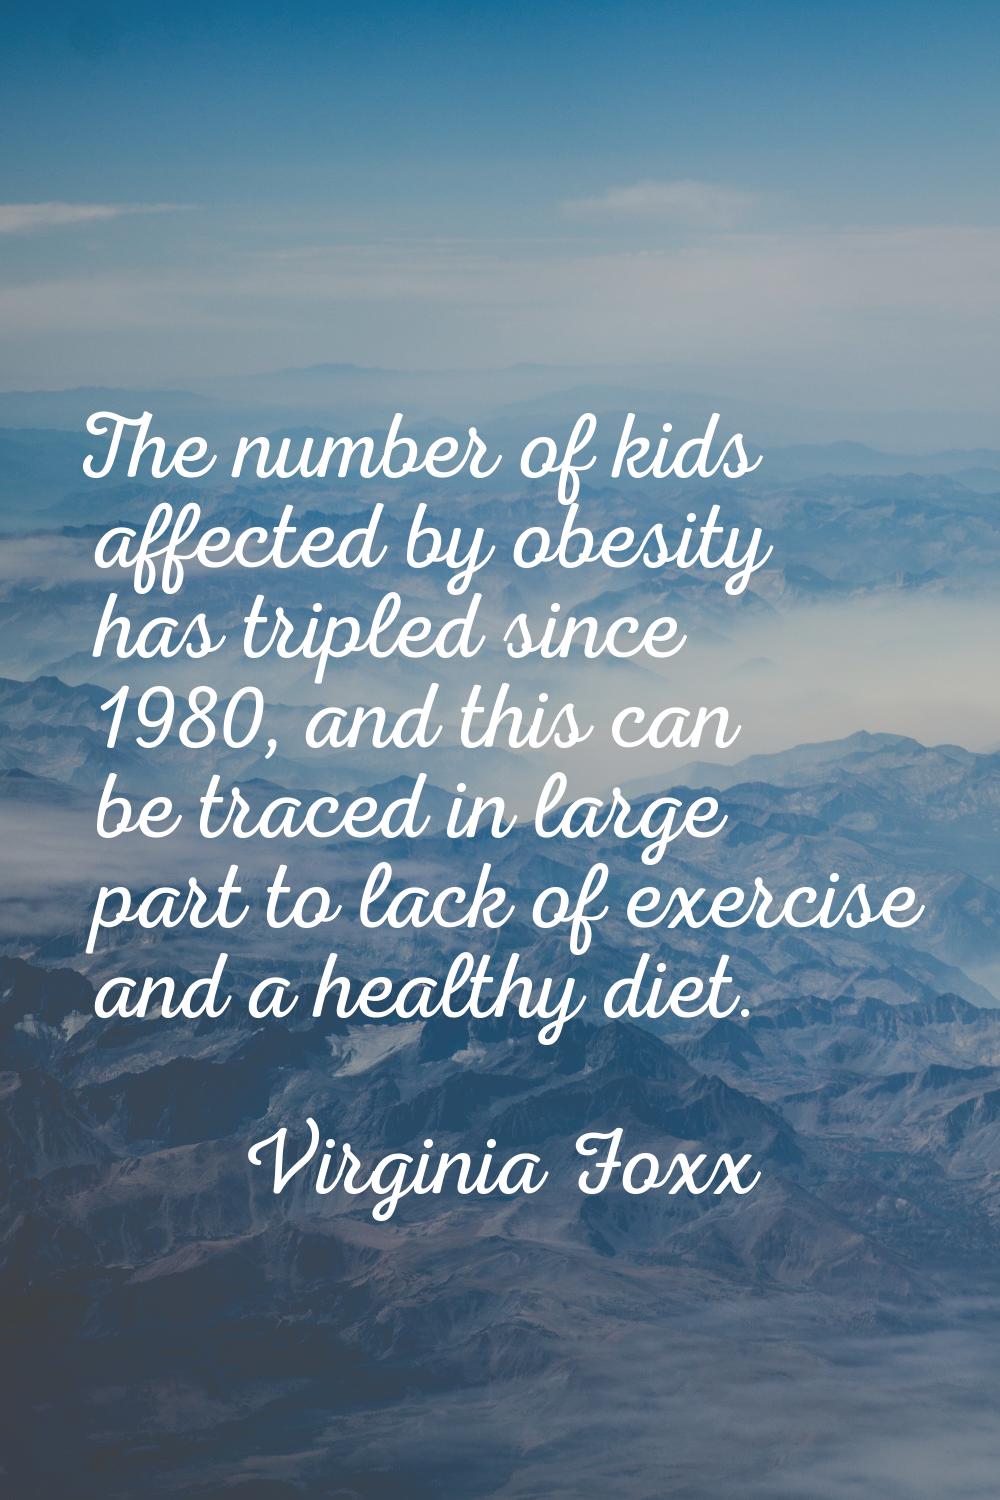 The number of kids affected by obesity has tripled since 1980, and this can be traced in large part